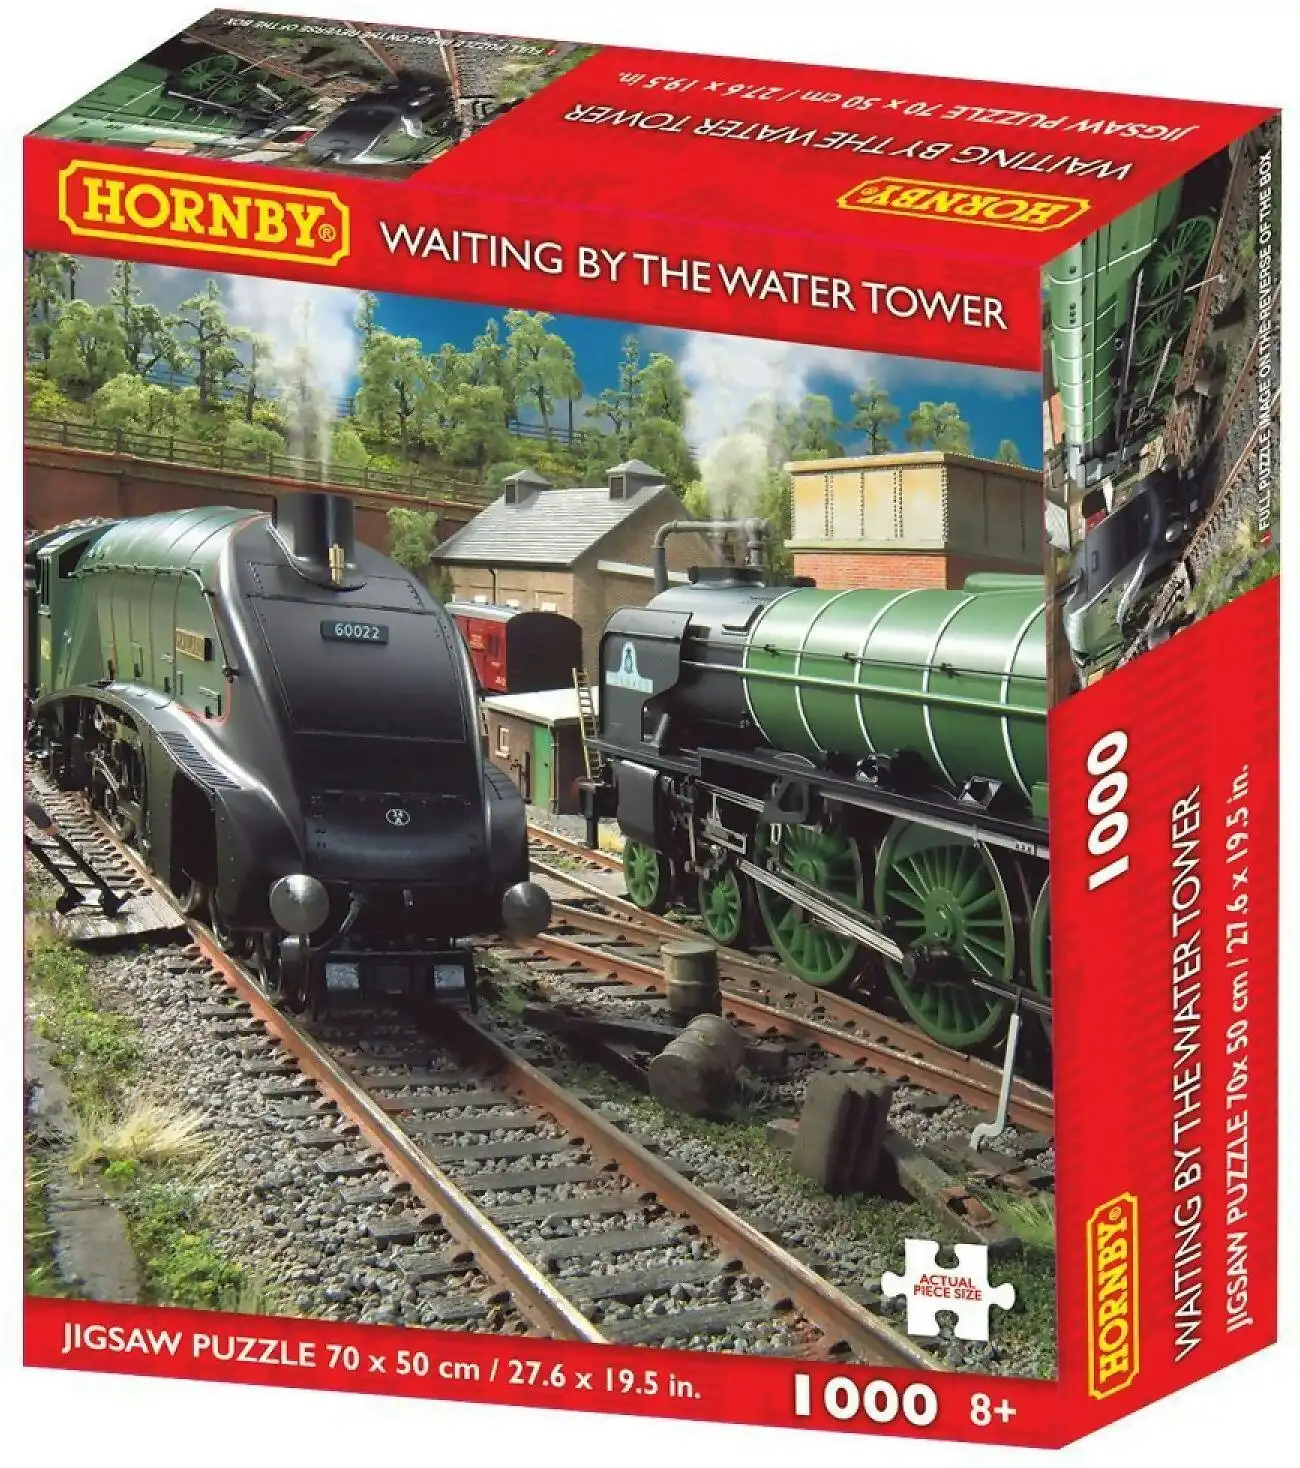 Holdson - Hornby Collection - Waiting By The Water Tower - Jigsaw Puzzle 1000 Pieces